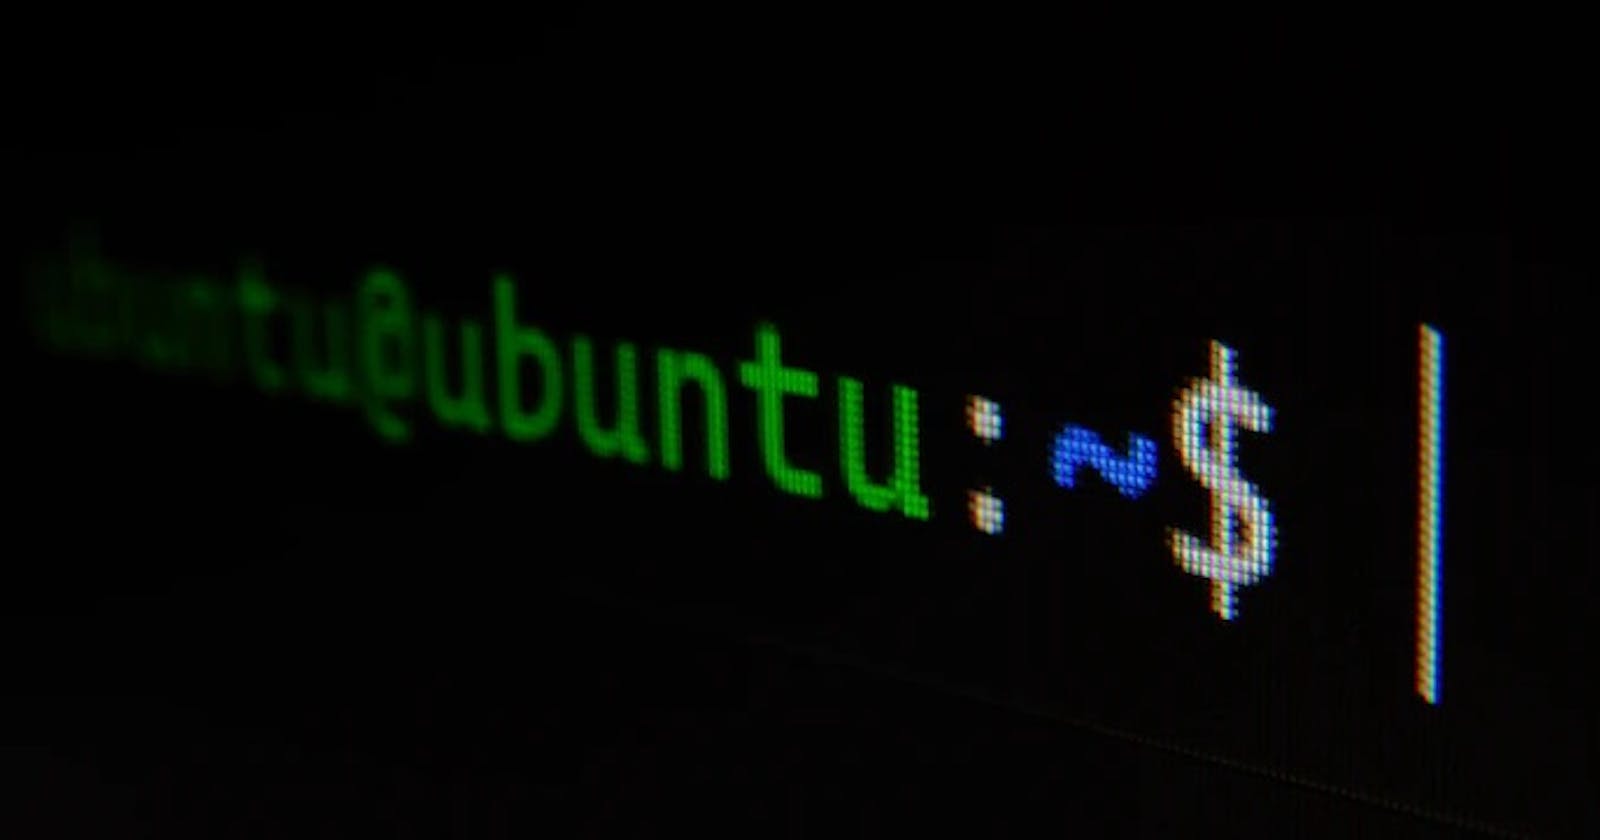 Understanding "mount" and "dd" commands in Linux